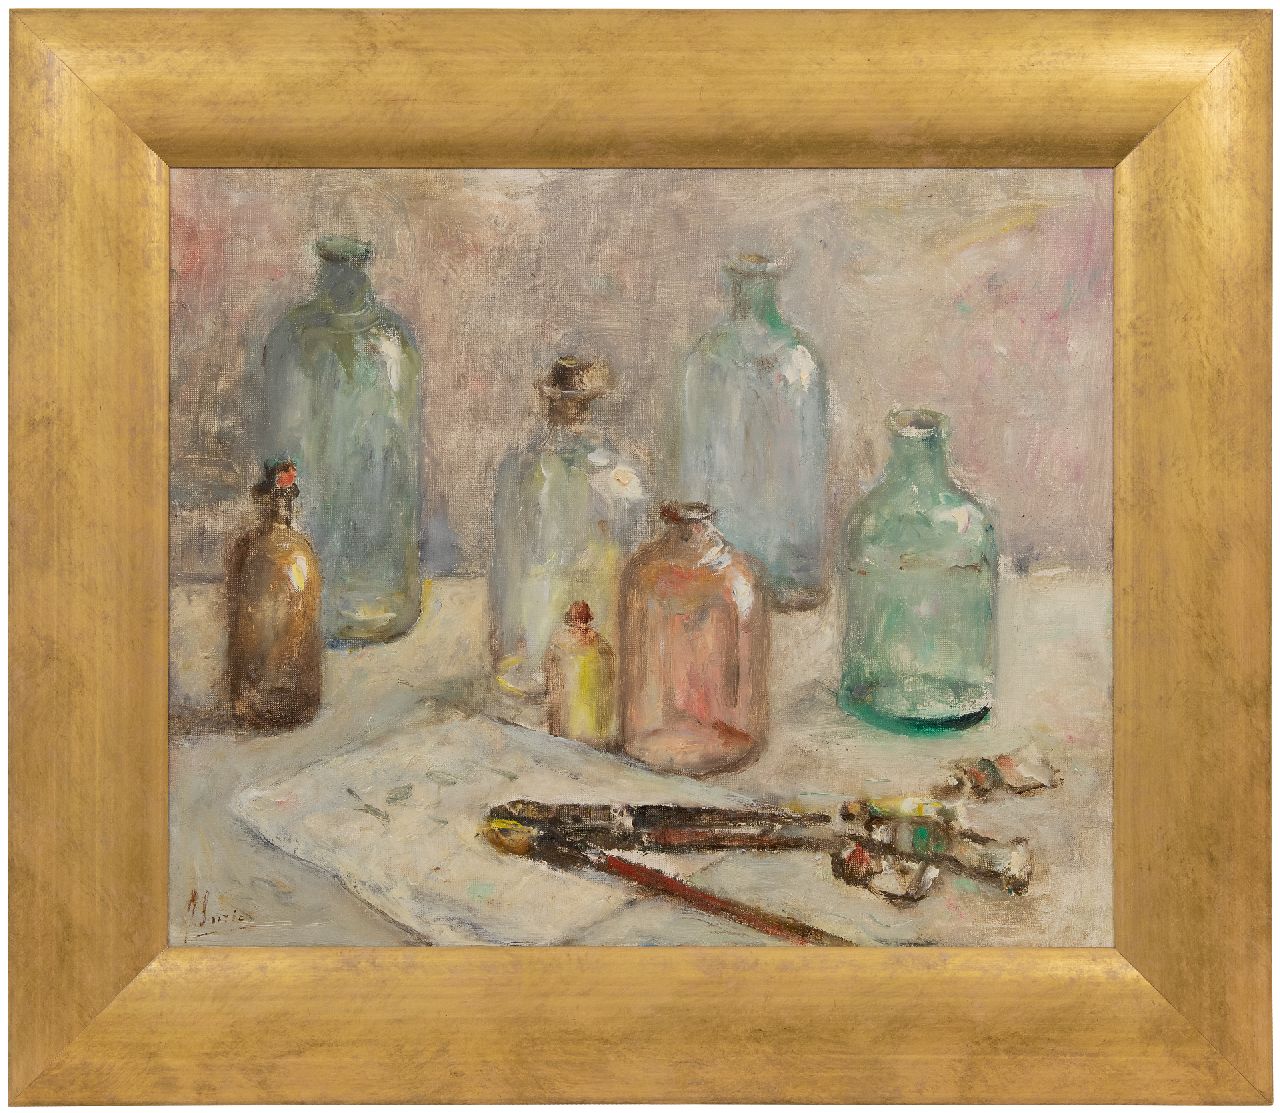 Surie J.  | Jacoba 'Coba' Surie | Paintings offered for sale | Still life with bottles and painter's attributes, oil on canvas 50.3 x 60.0 cm, signed l.l.